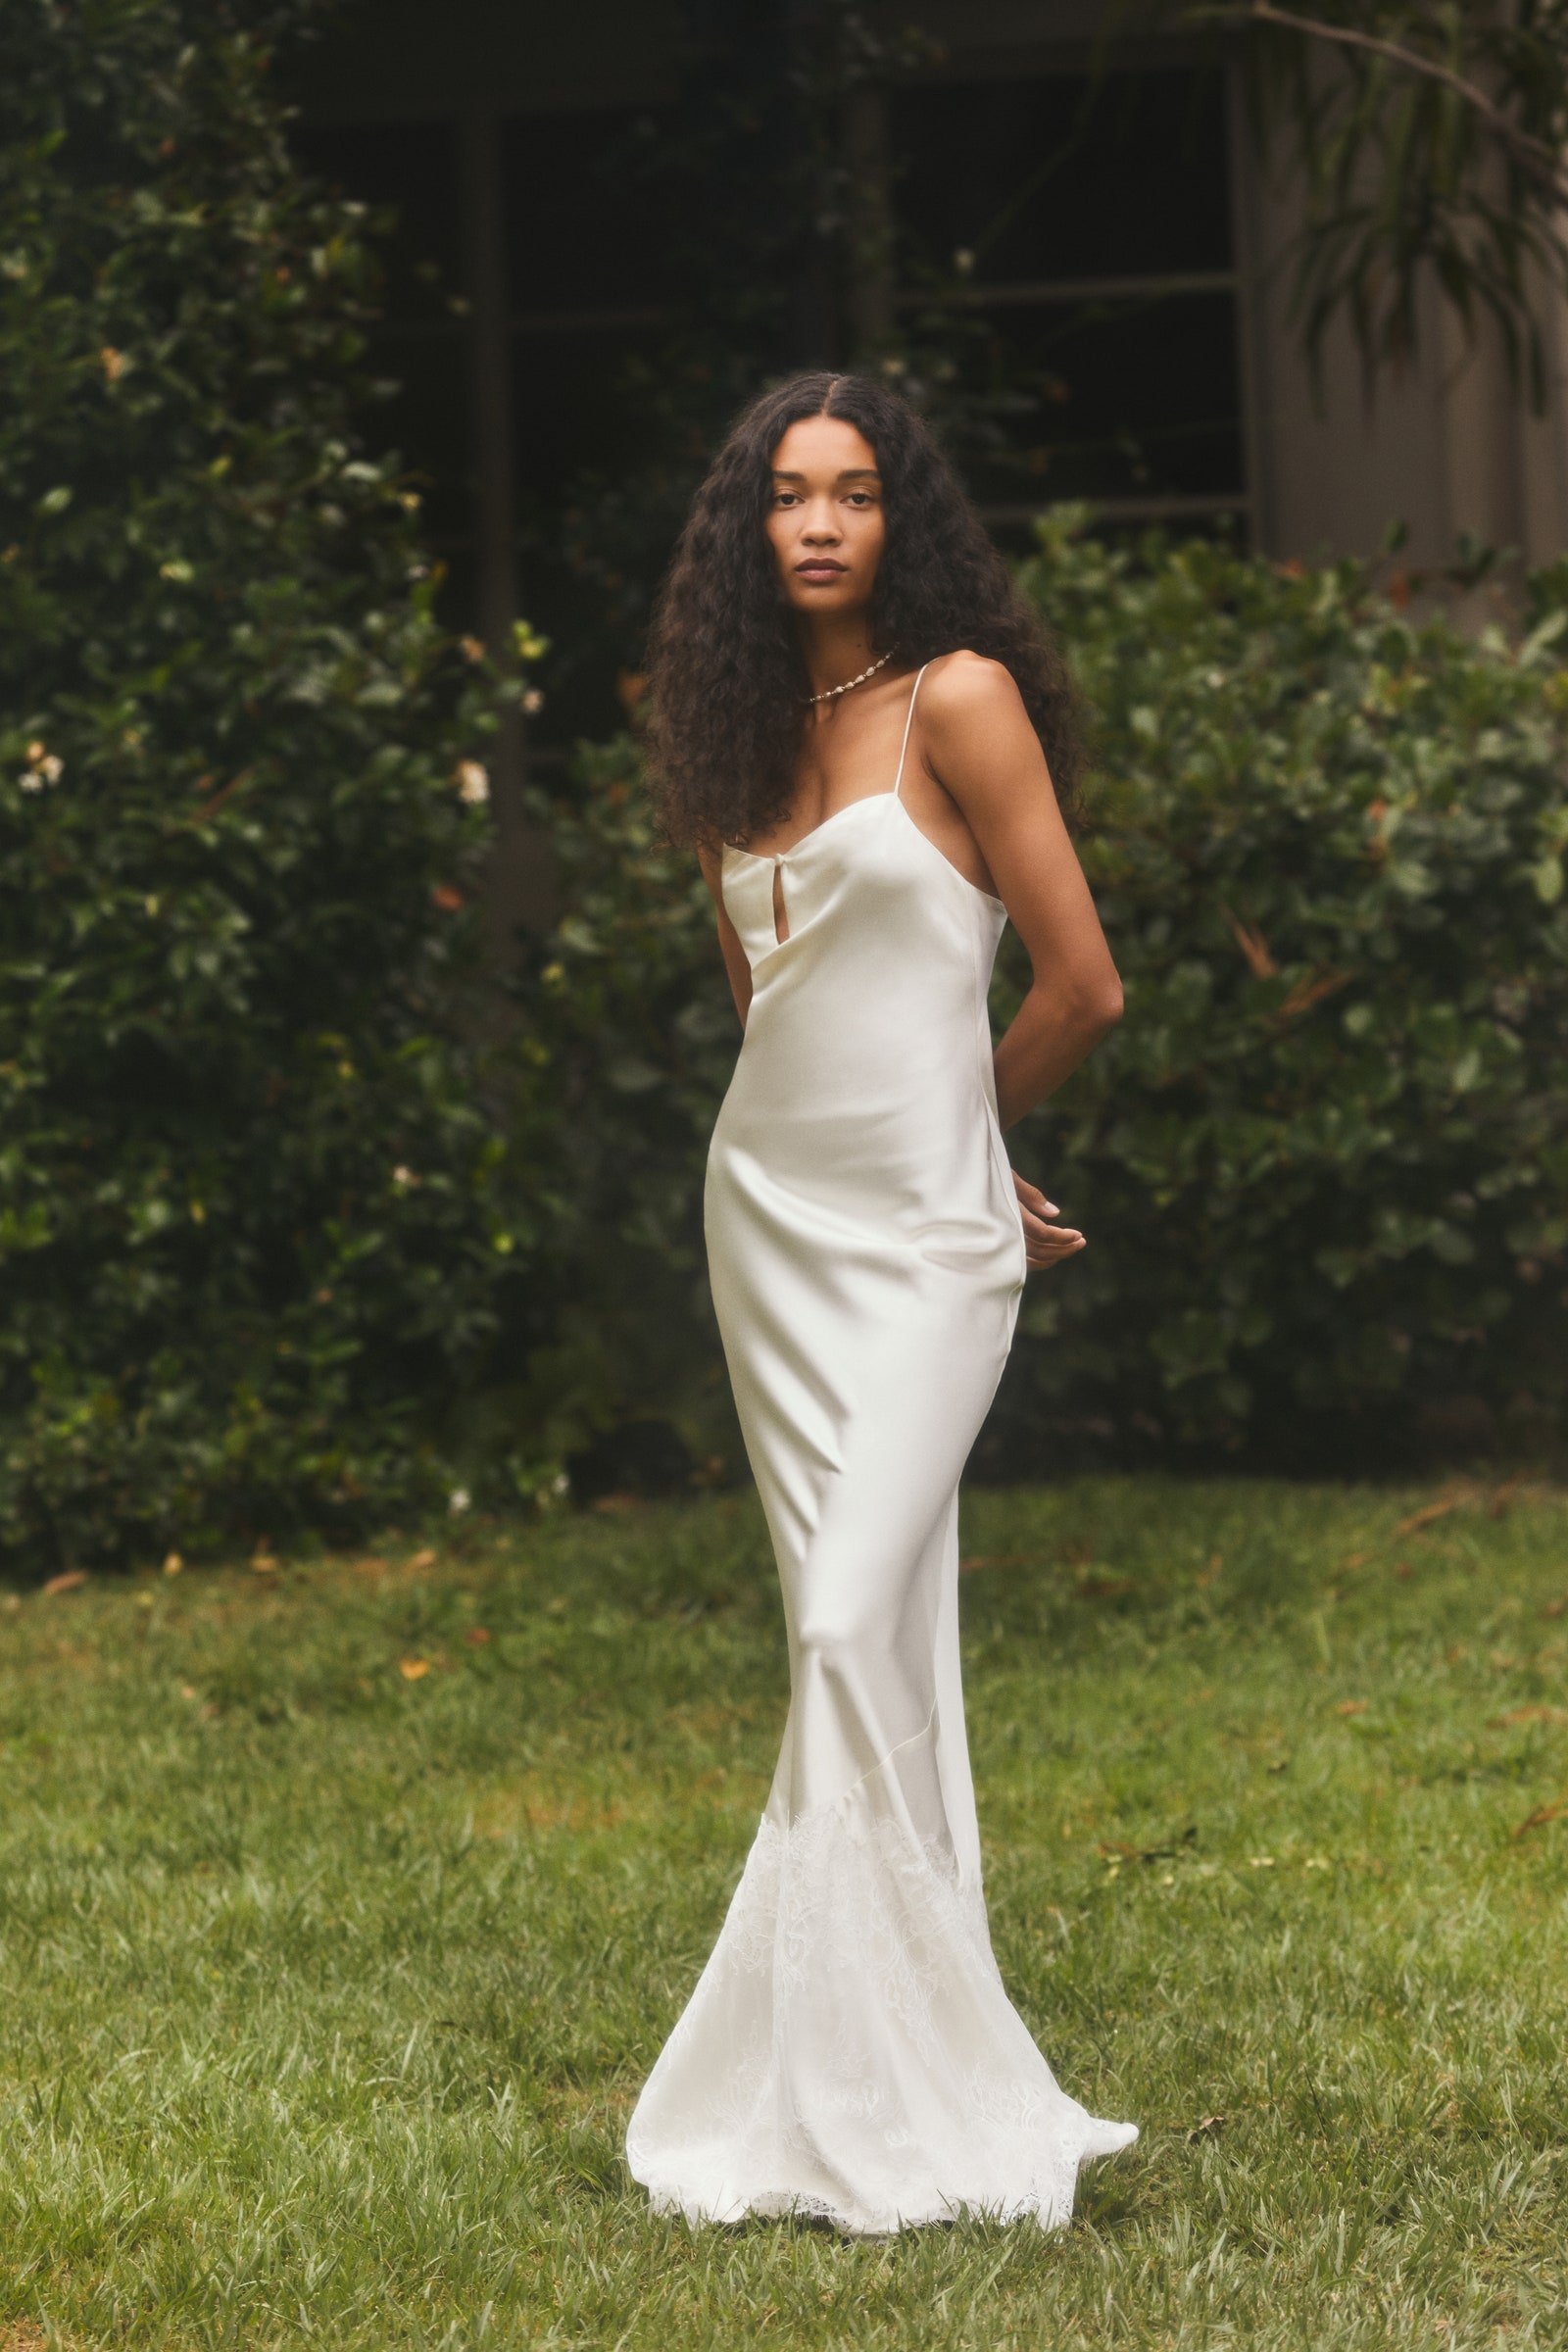 Hand-Me-Gowns Bridal – South Jersey and Philadelphia